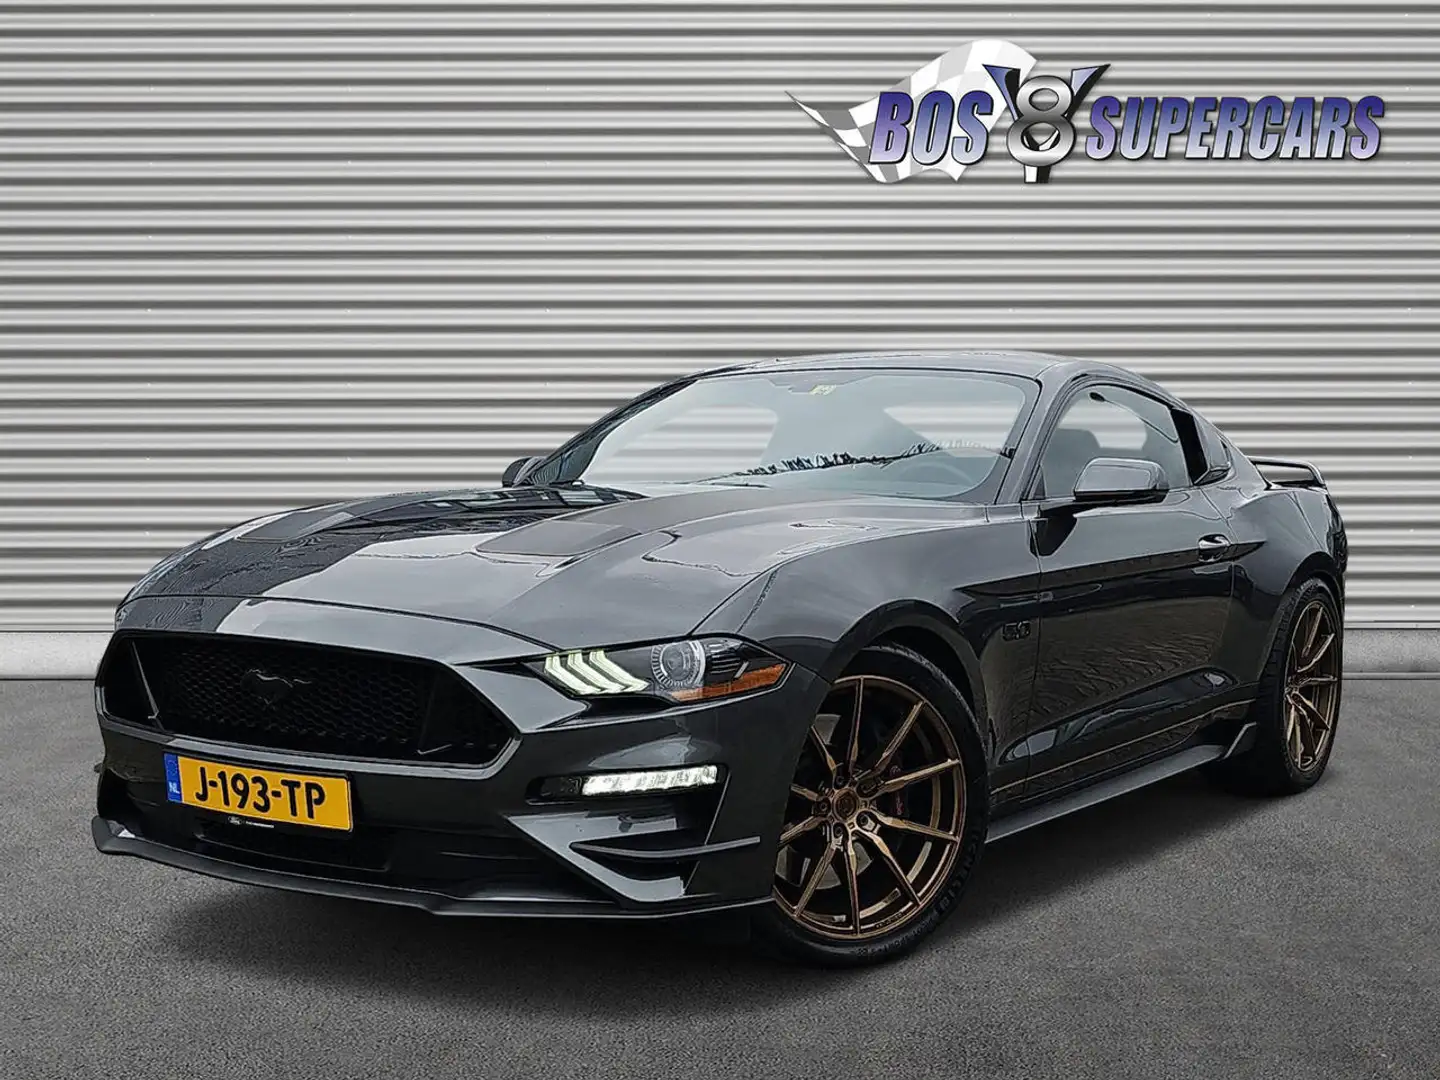 Ford Mustang GT PREMIUM 5.0 V8 SUPERCHARGED 700PK Grijs - 1